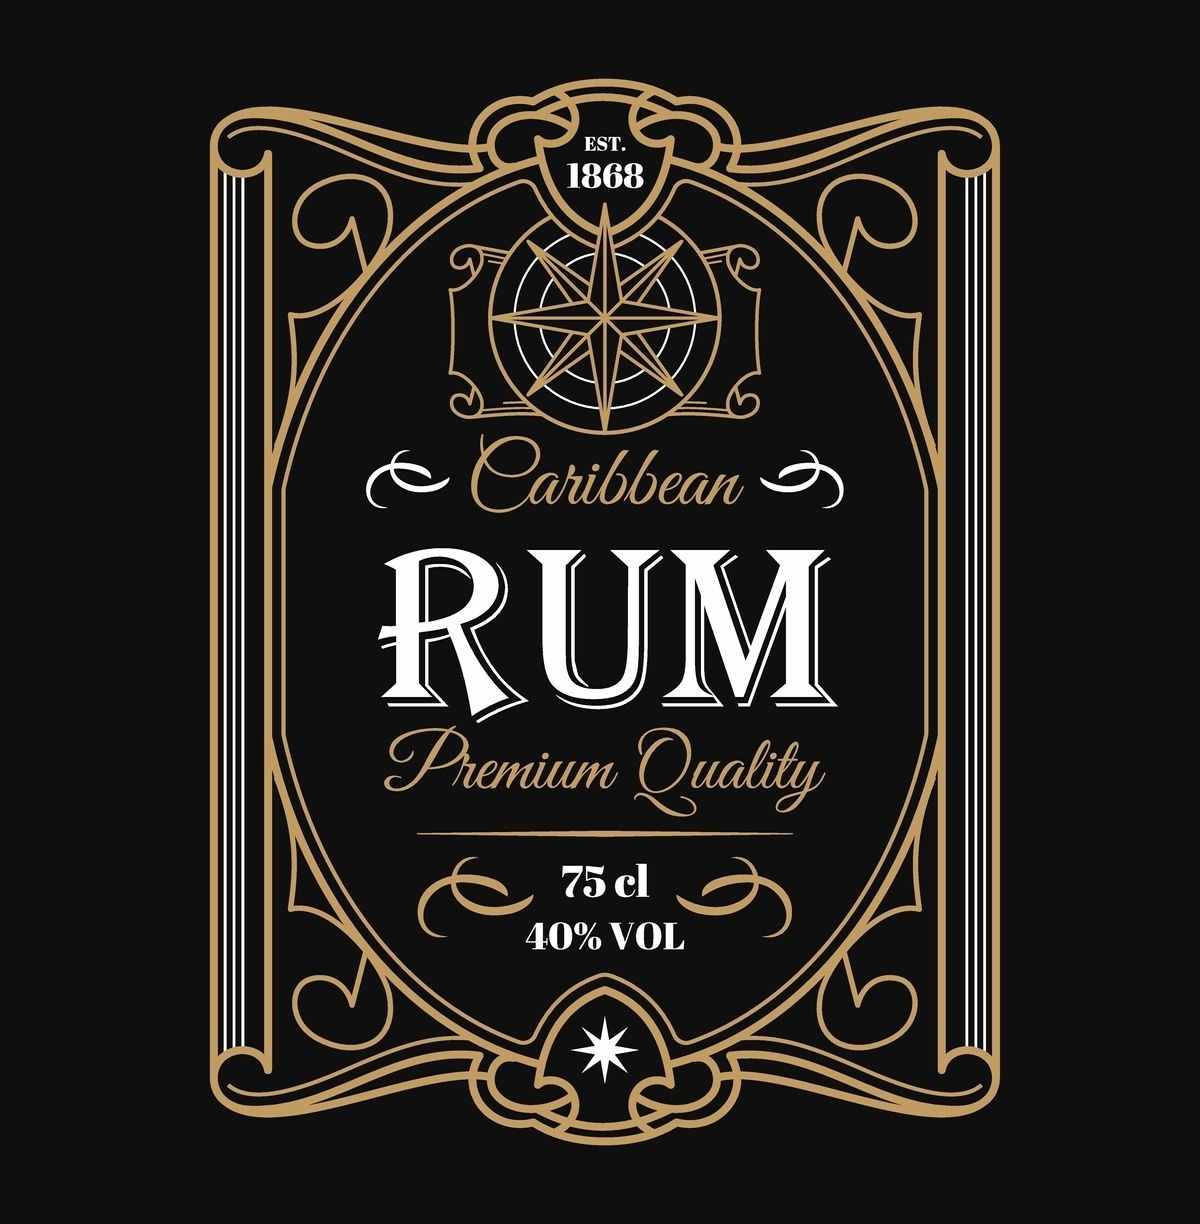 A black rum label, consisting of golden filigree around the word rum in white letters on a black background.